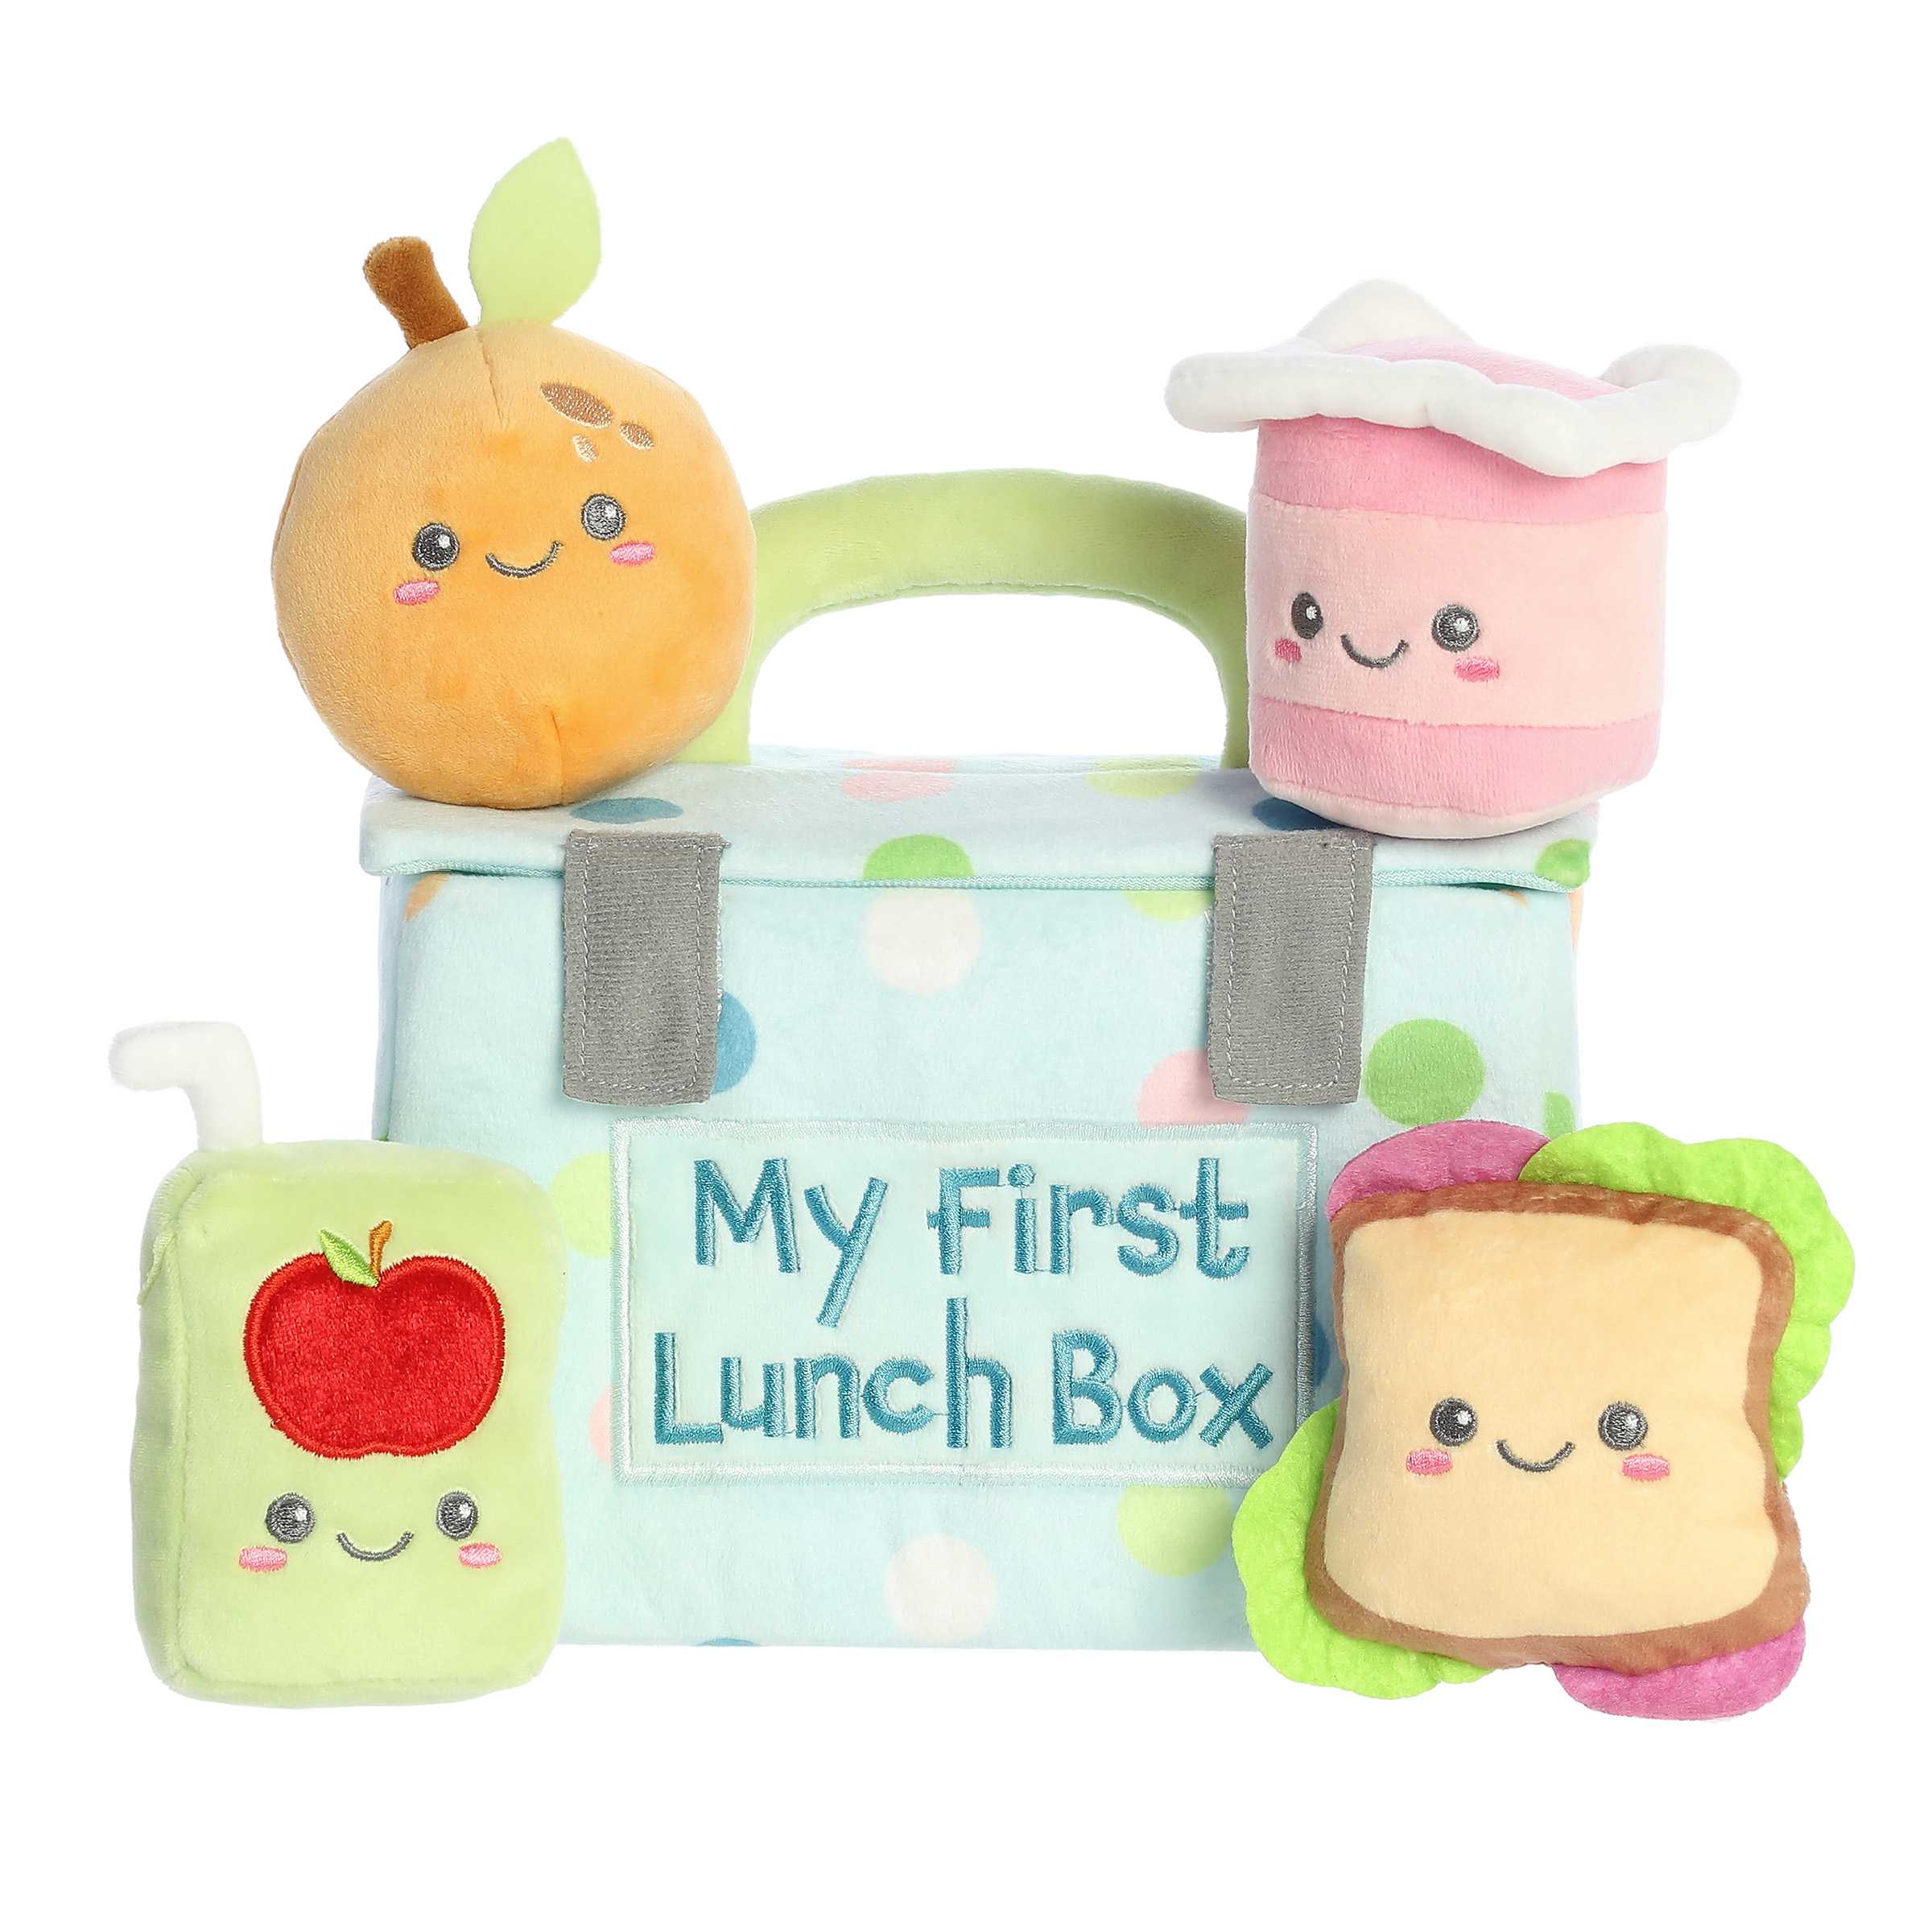 Soft fabric lunchbox with bright design and plush food items that rattle and crinkle, designed for sensory play, by ebba.